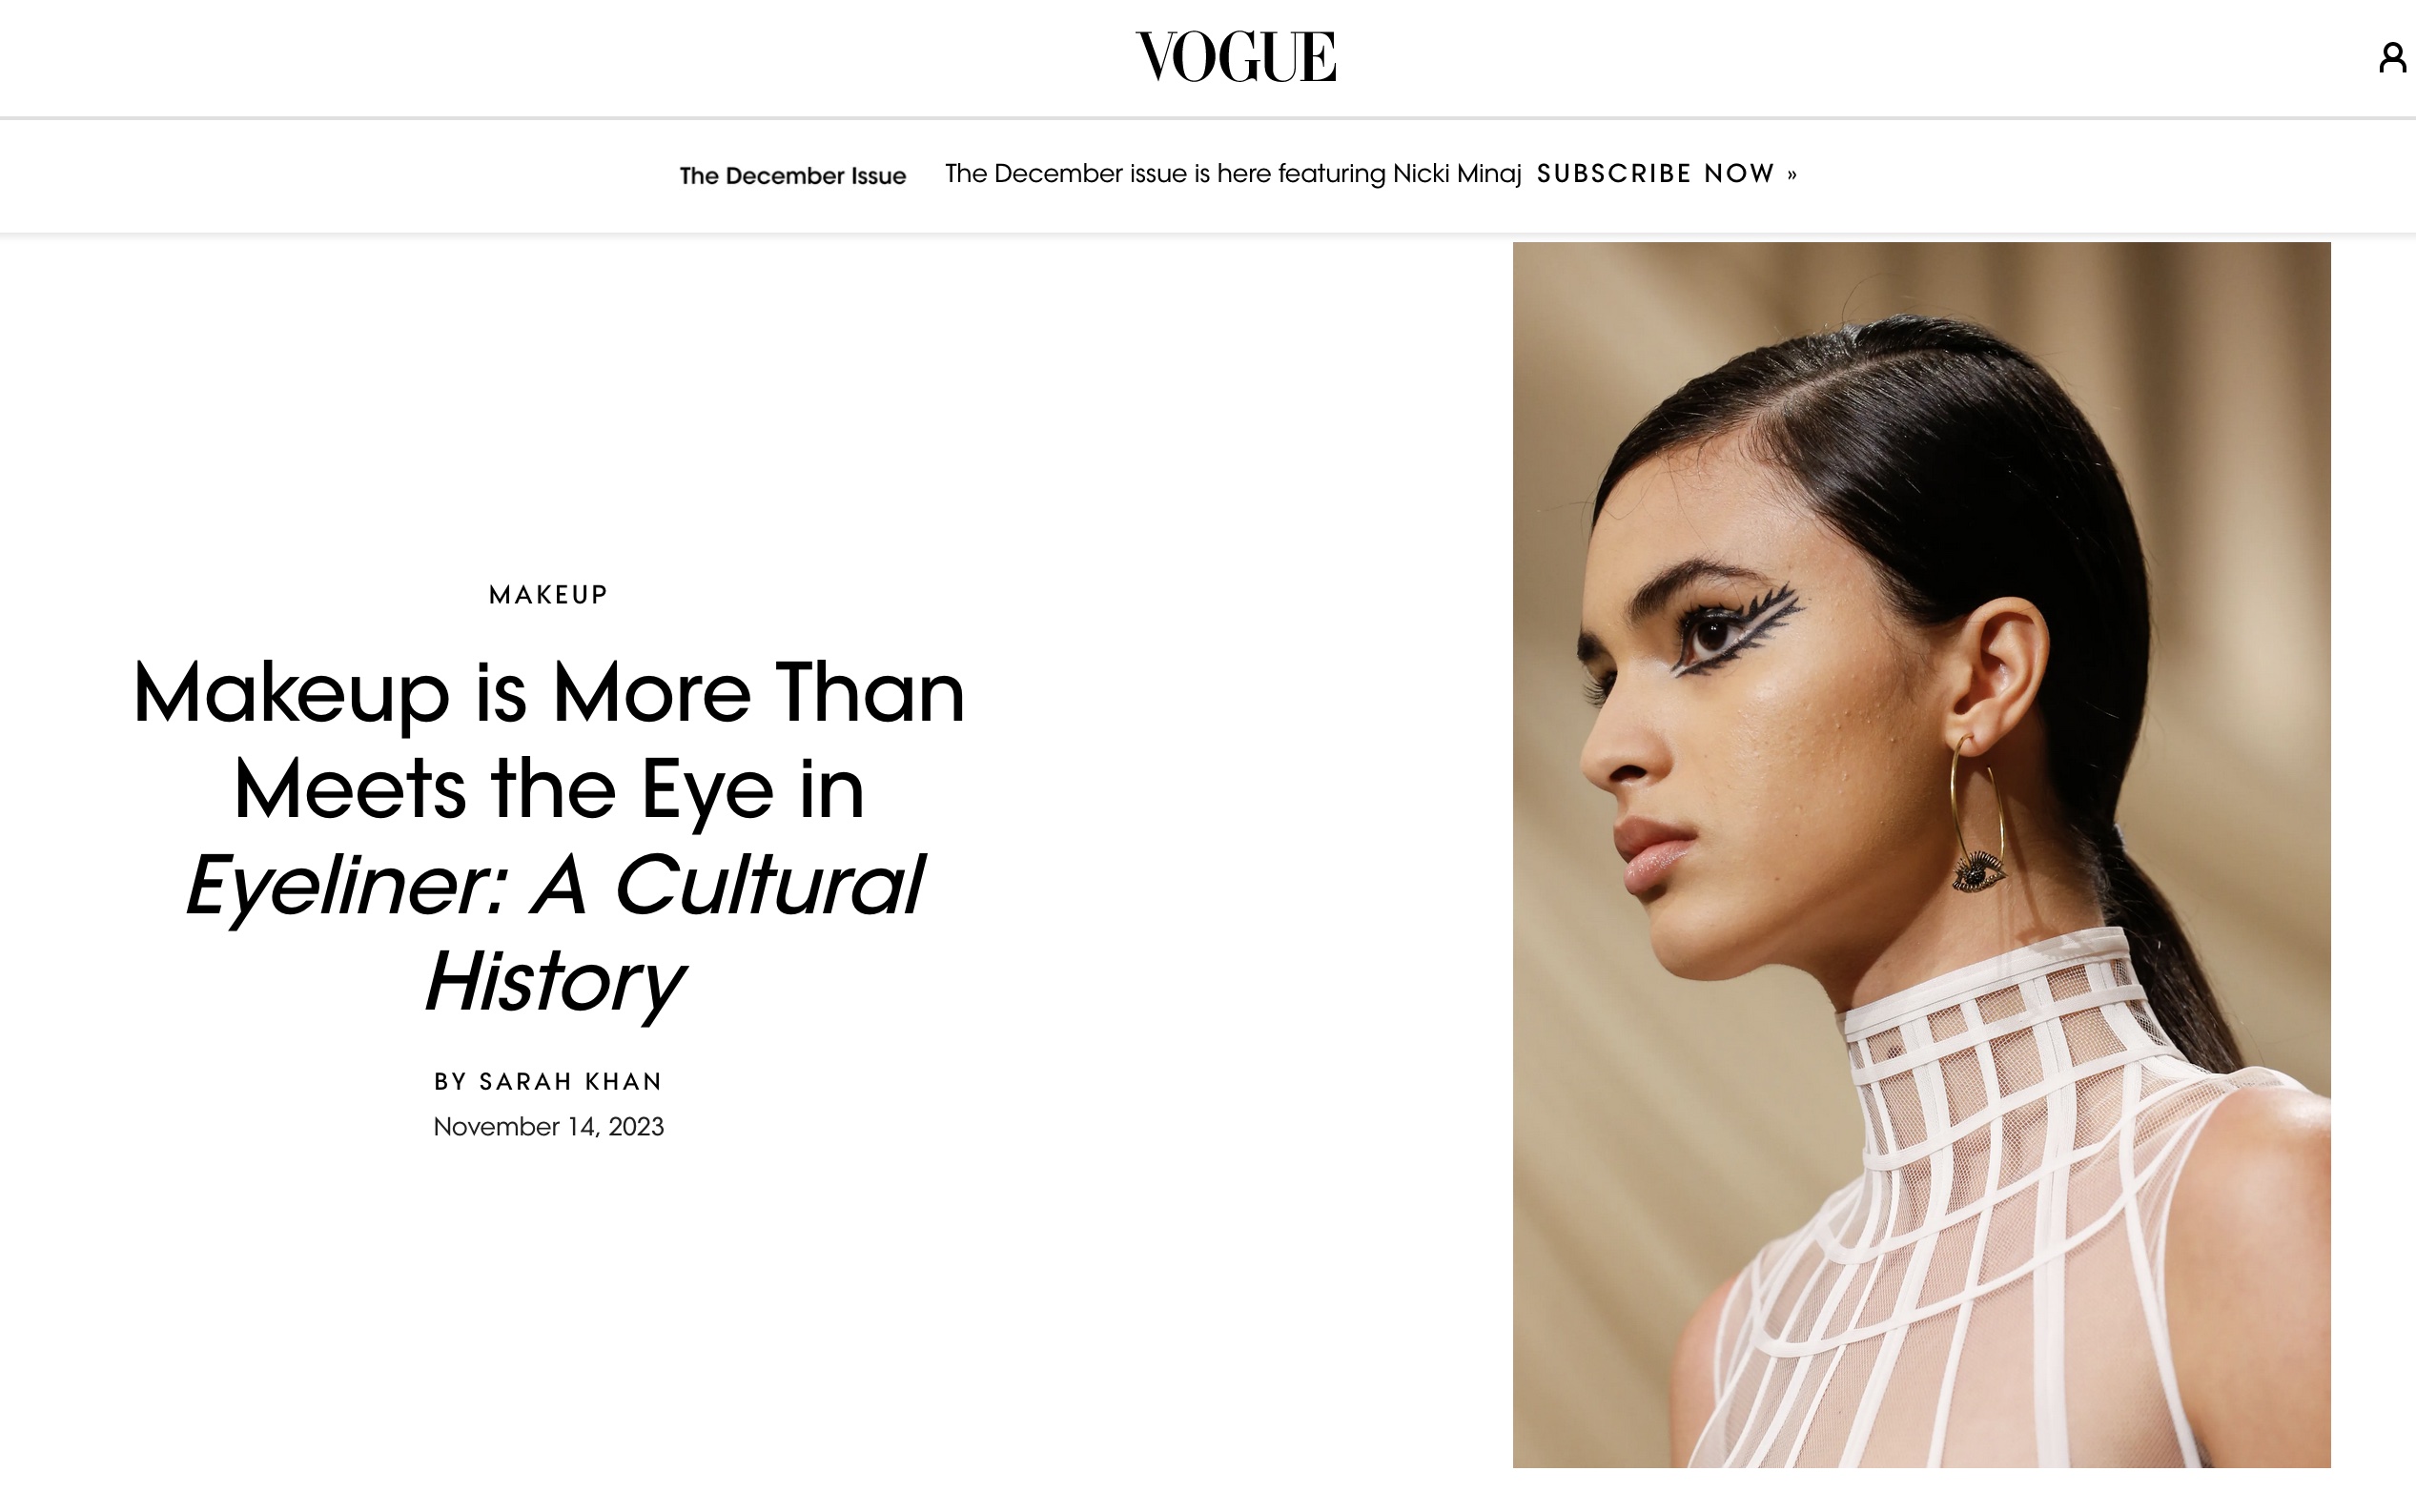 Vogue: Makeup Is More Than Meets the Eye in Eyeliner: A Cultural History